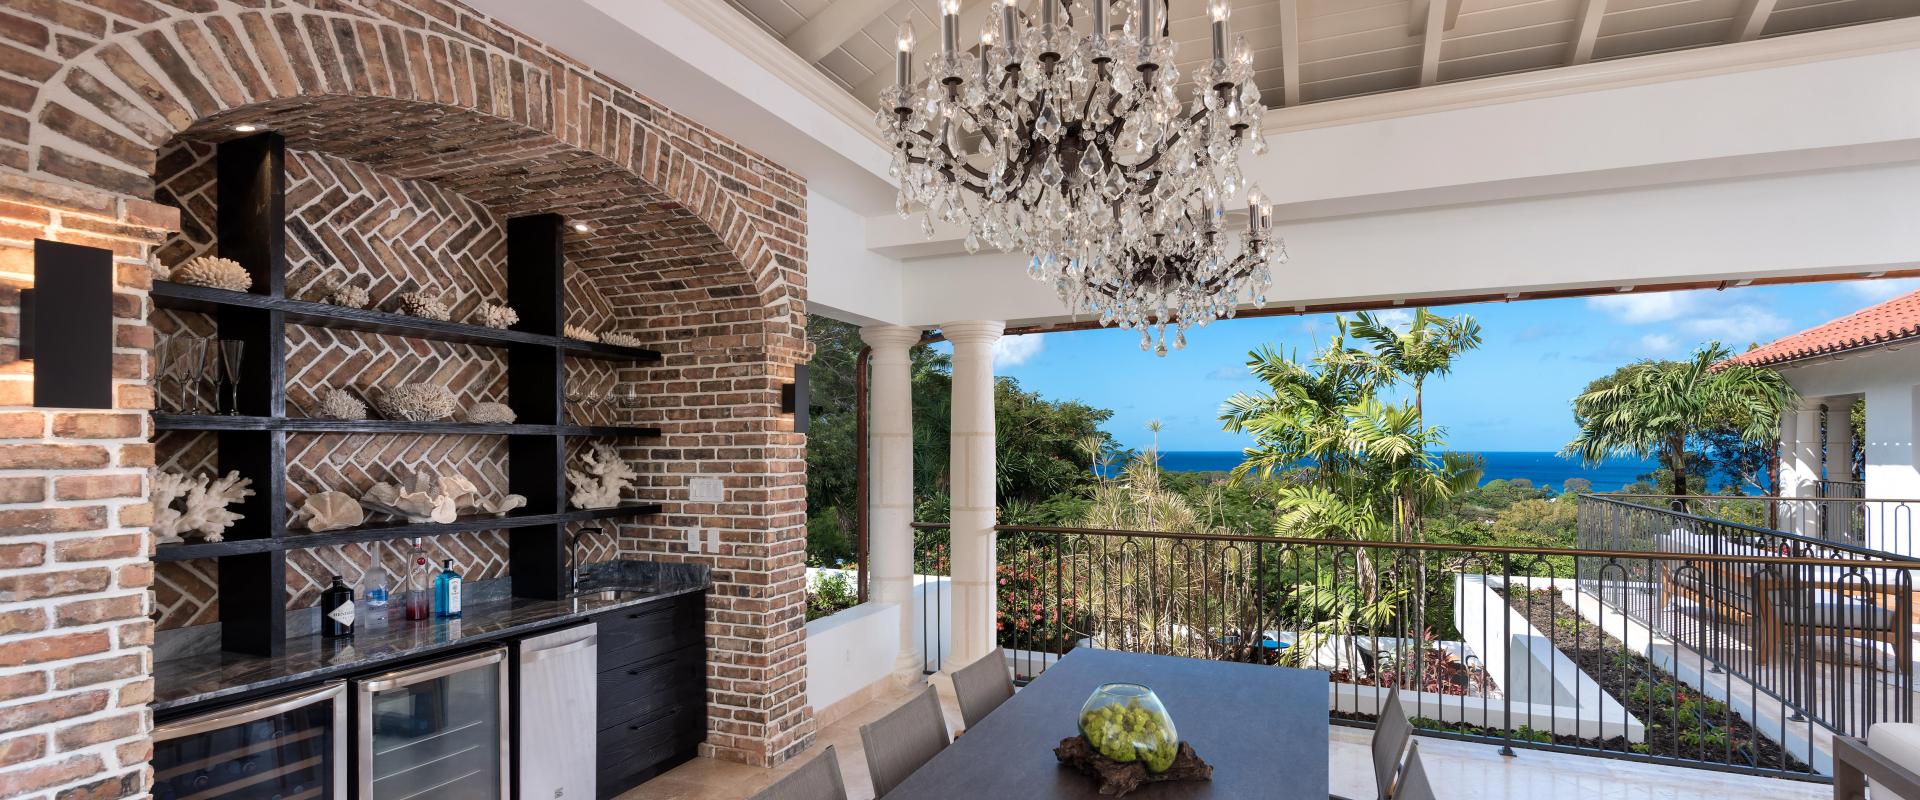 Wine Bar and Grill Elsewhere 10 Bedroom Sandy Lane Villa For Rent In Barbados